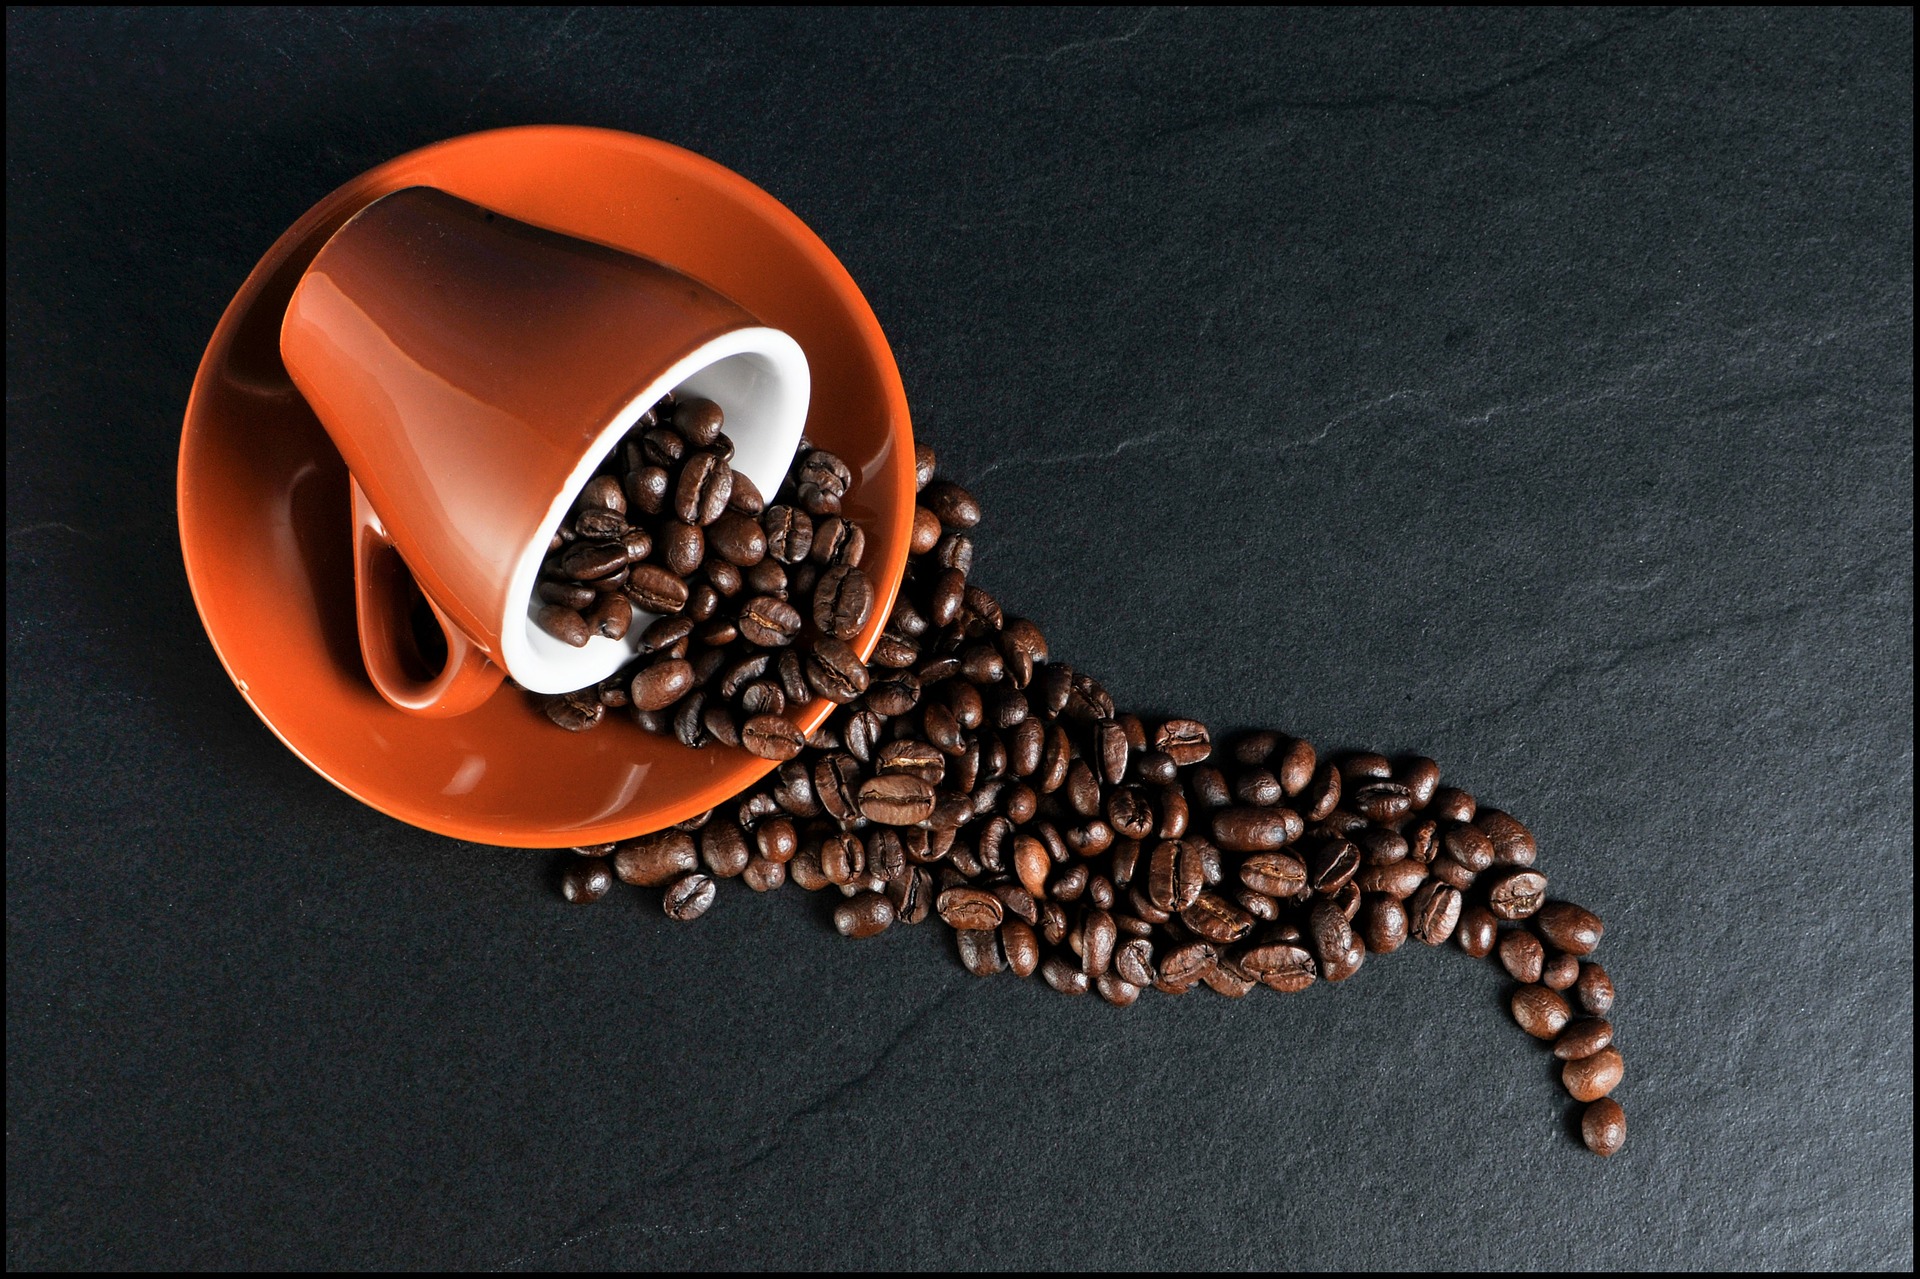 A coffee cup on its side spilling whole coffee beans